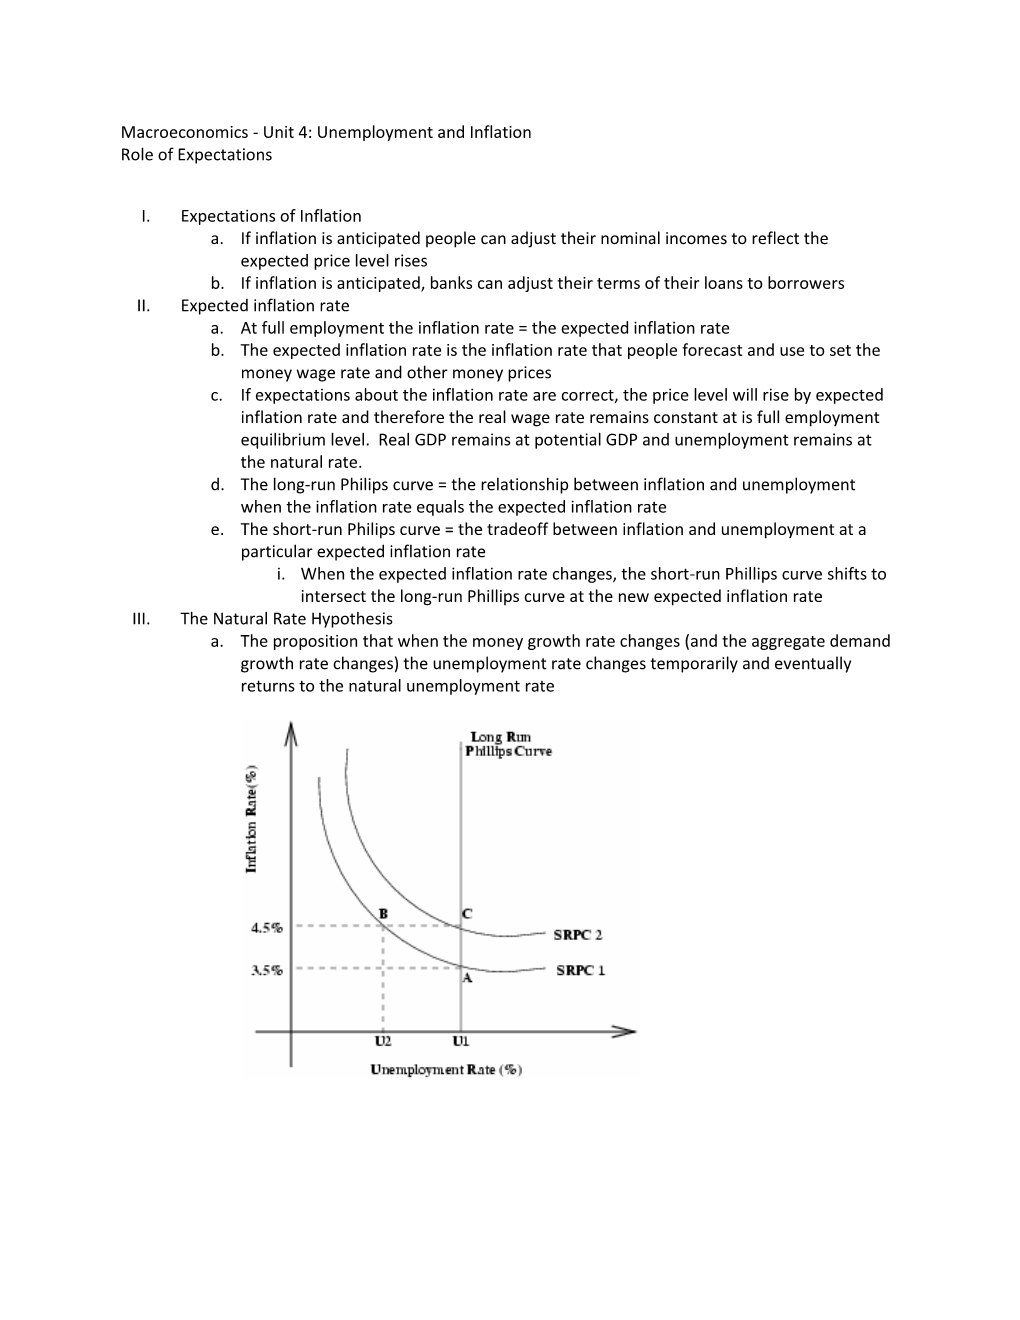 Macroeconomics - Unit 4: Unemployment and Inflation Role of Expectations